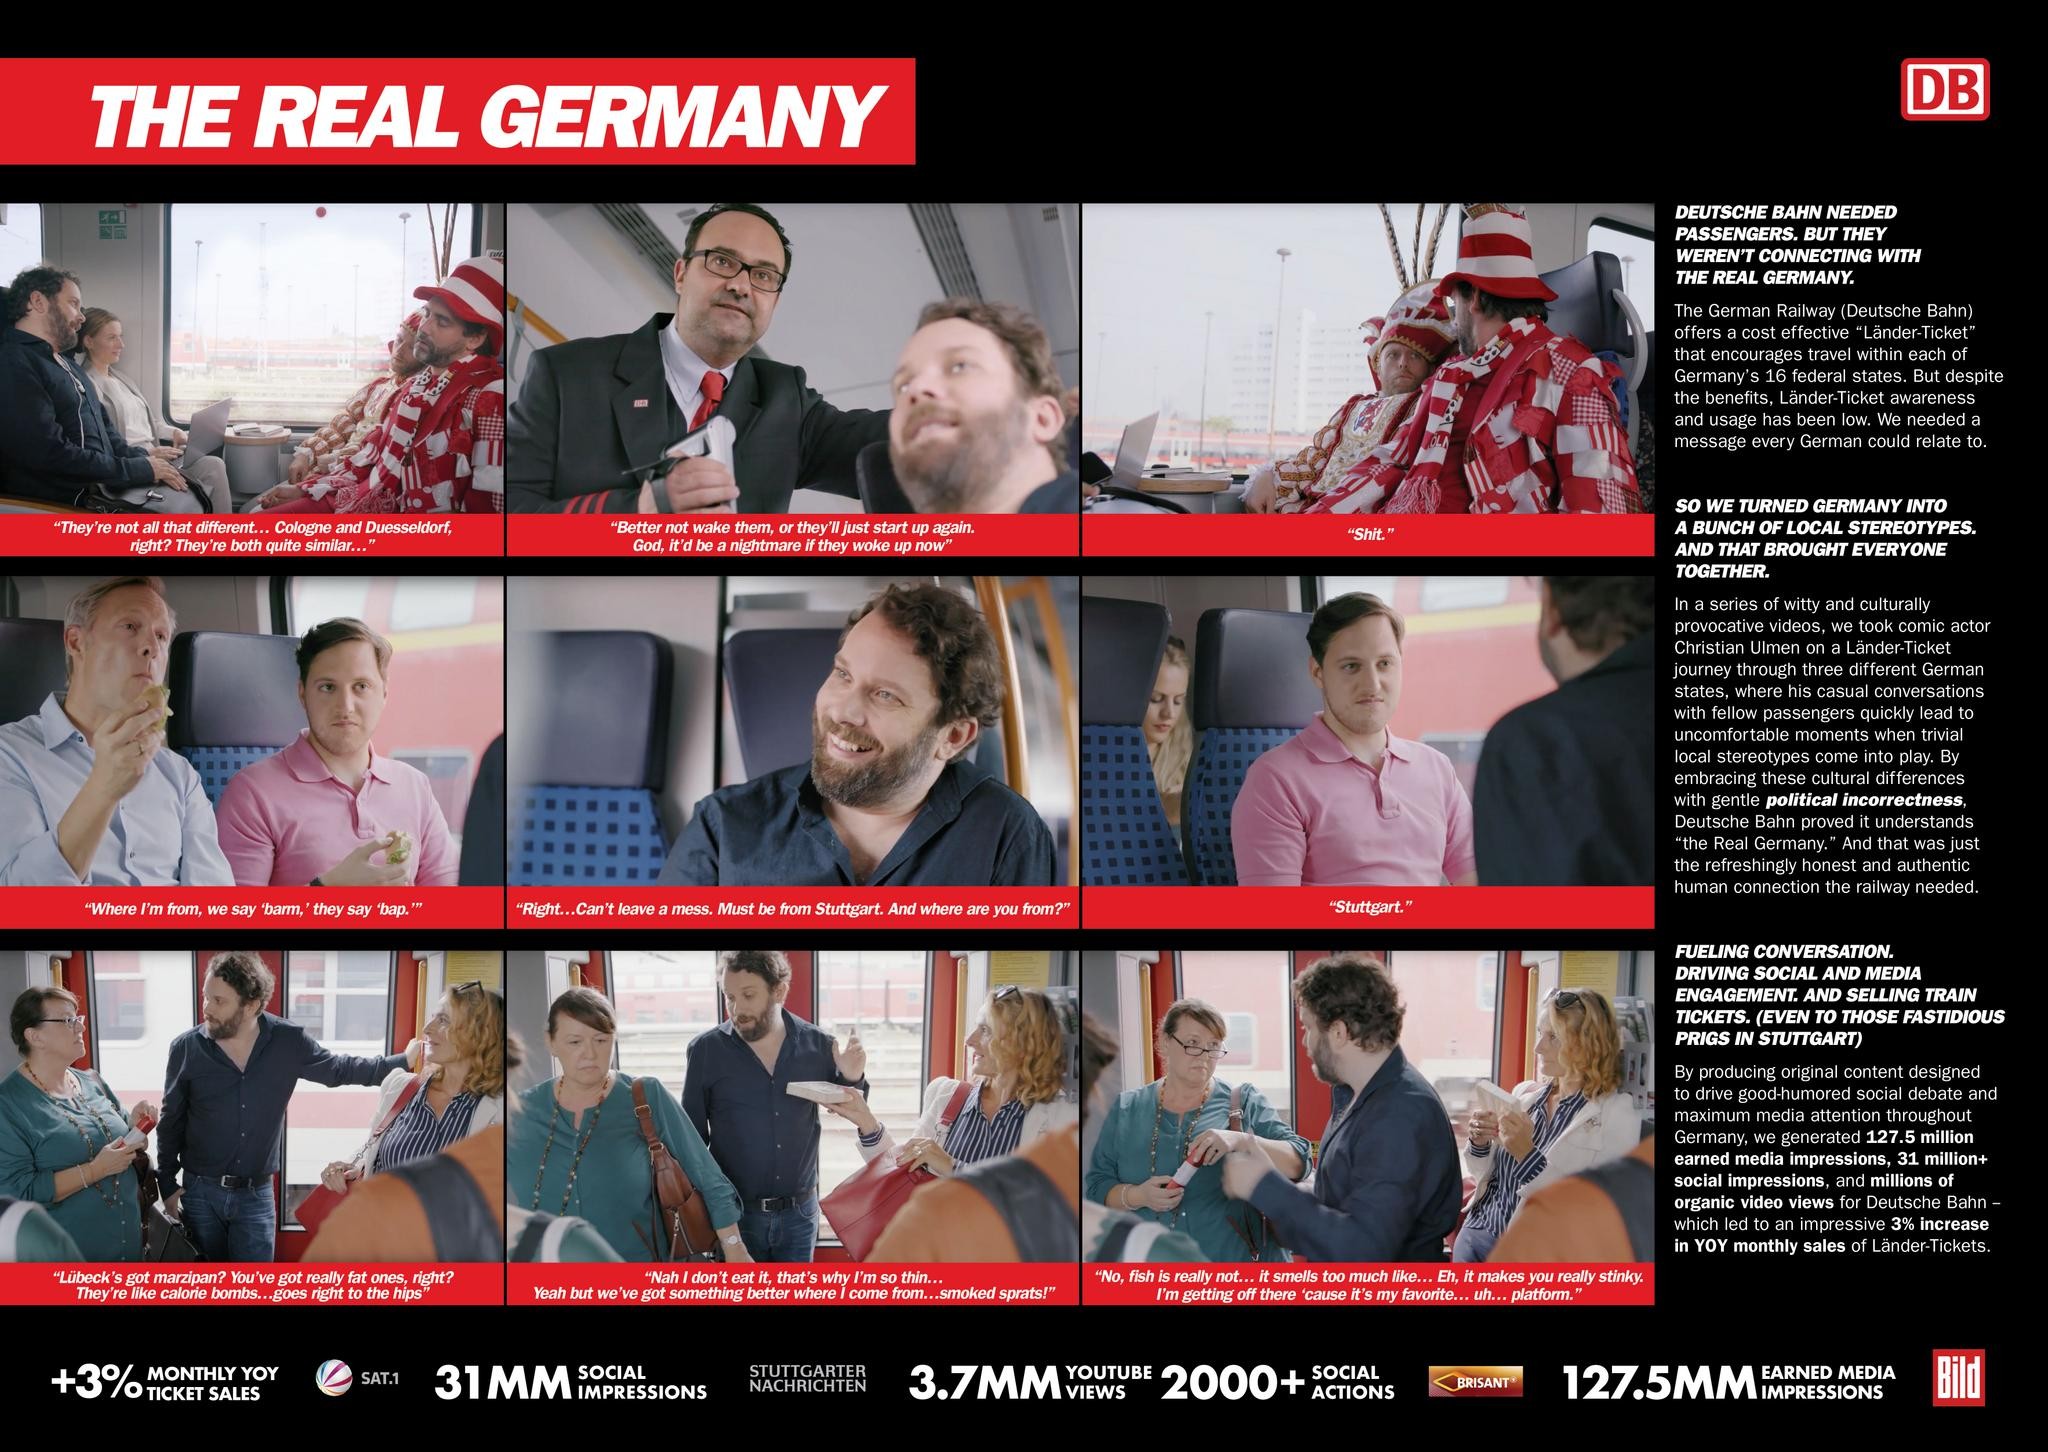 DISCOVER THE REAL GERMANY